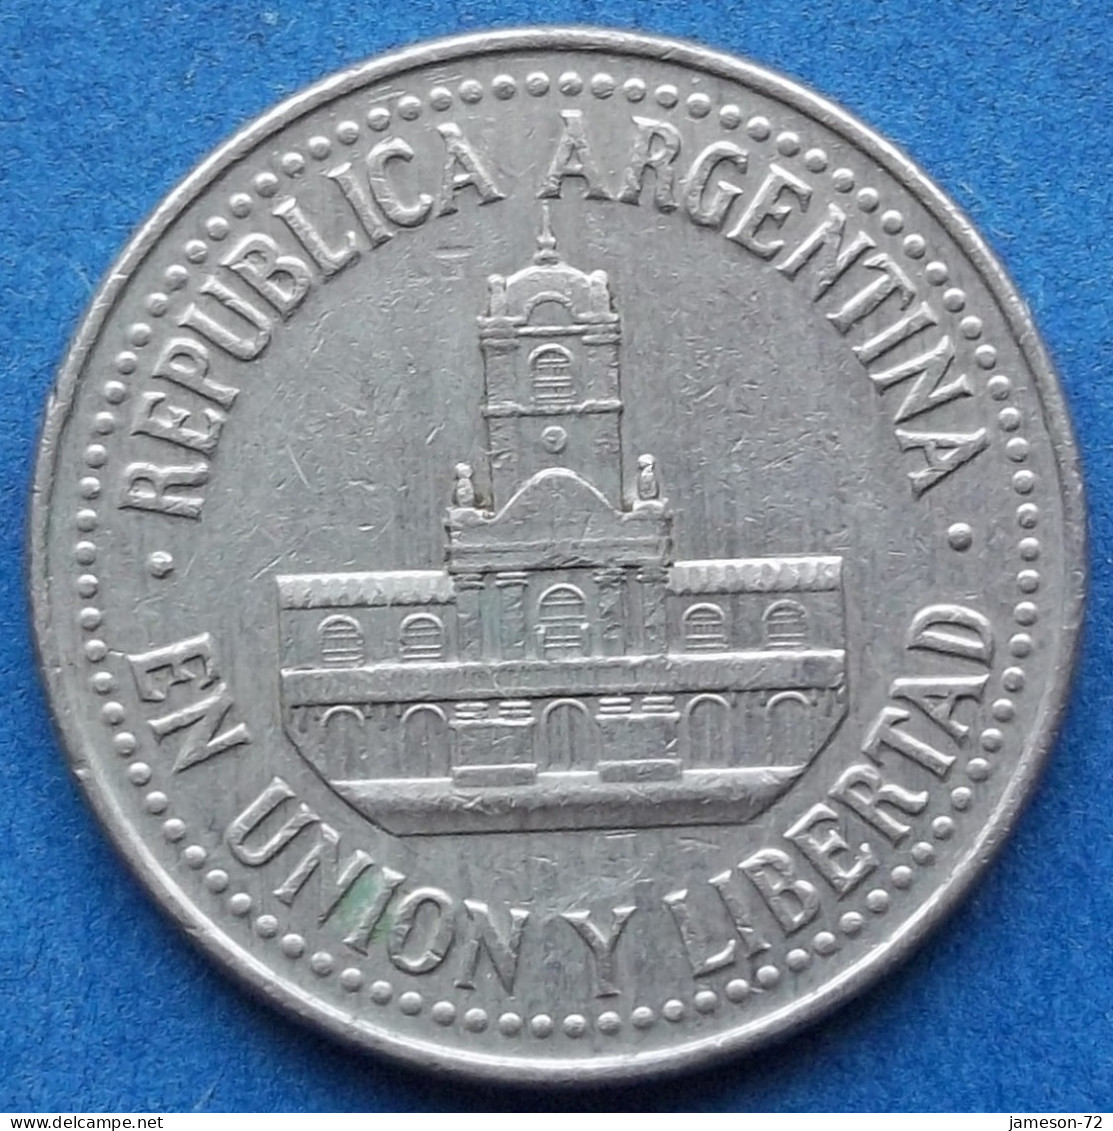 ARGENTINA - 25 Centavos 1993 "Buenos Aires City Hall" KM# 82 Monetary Reform (1992) - Edelweiss Coins - Argentina